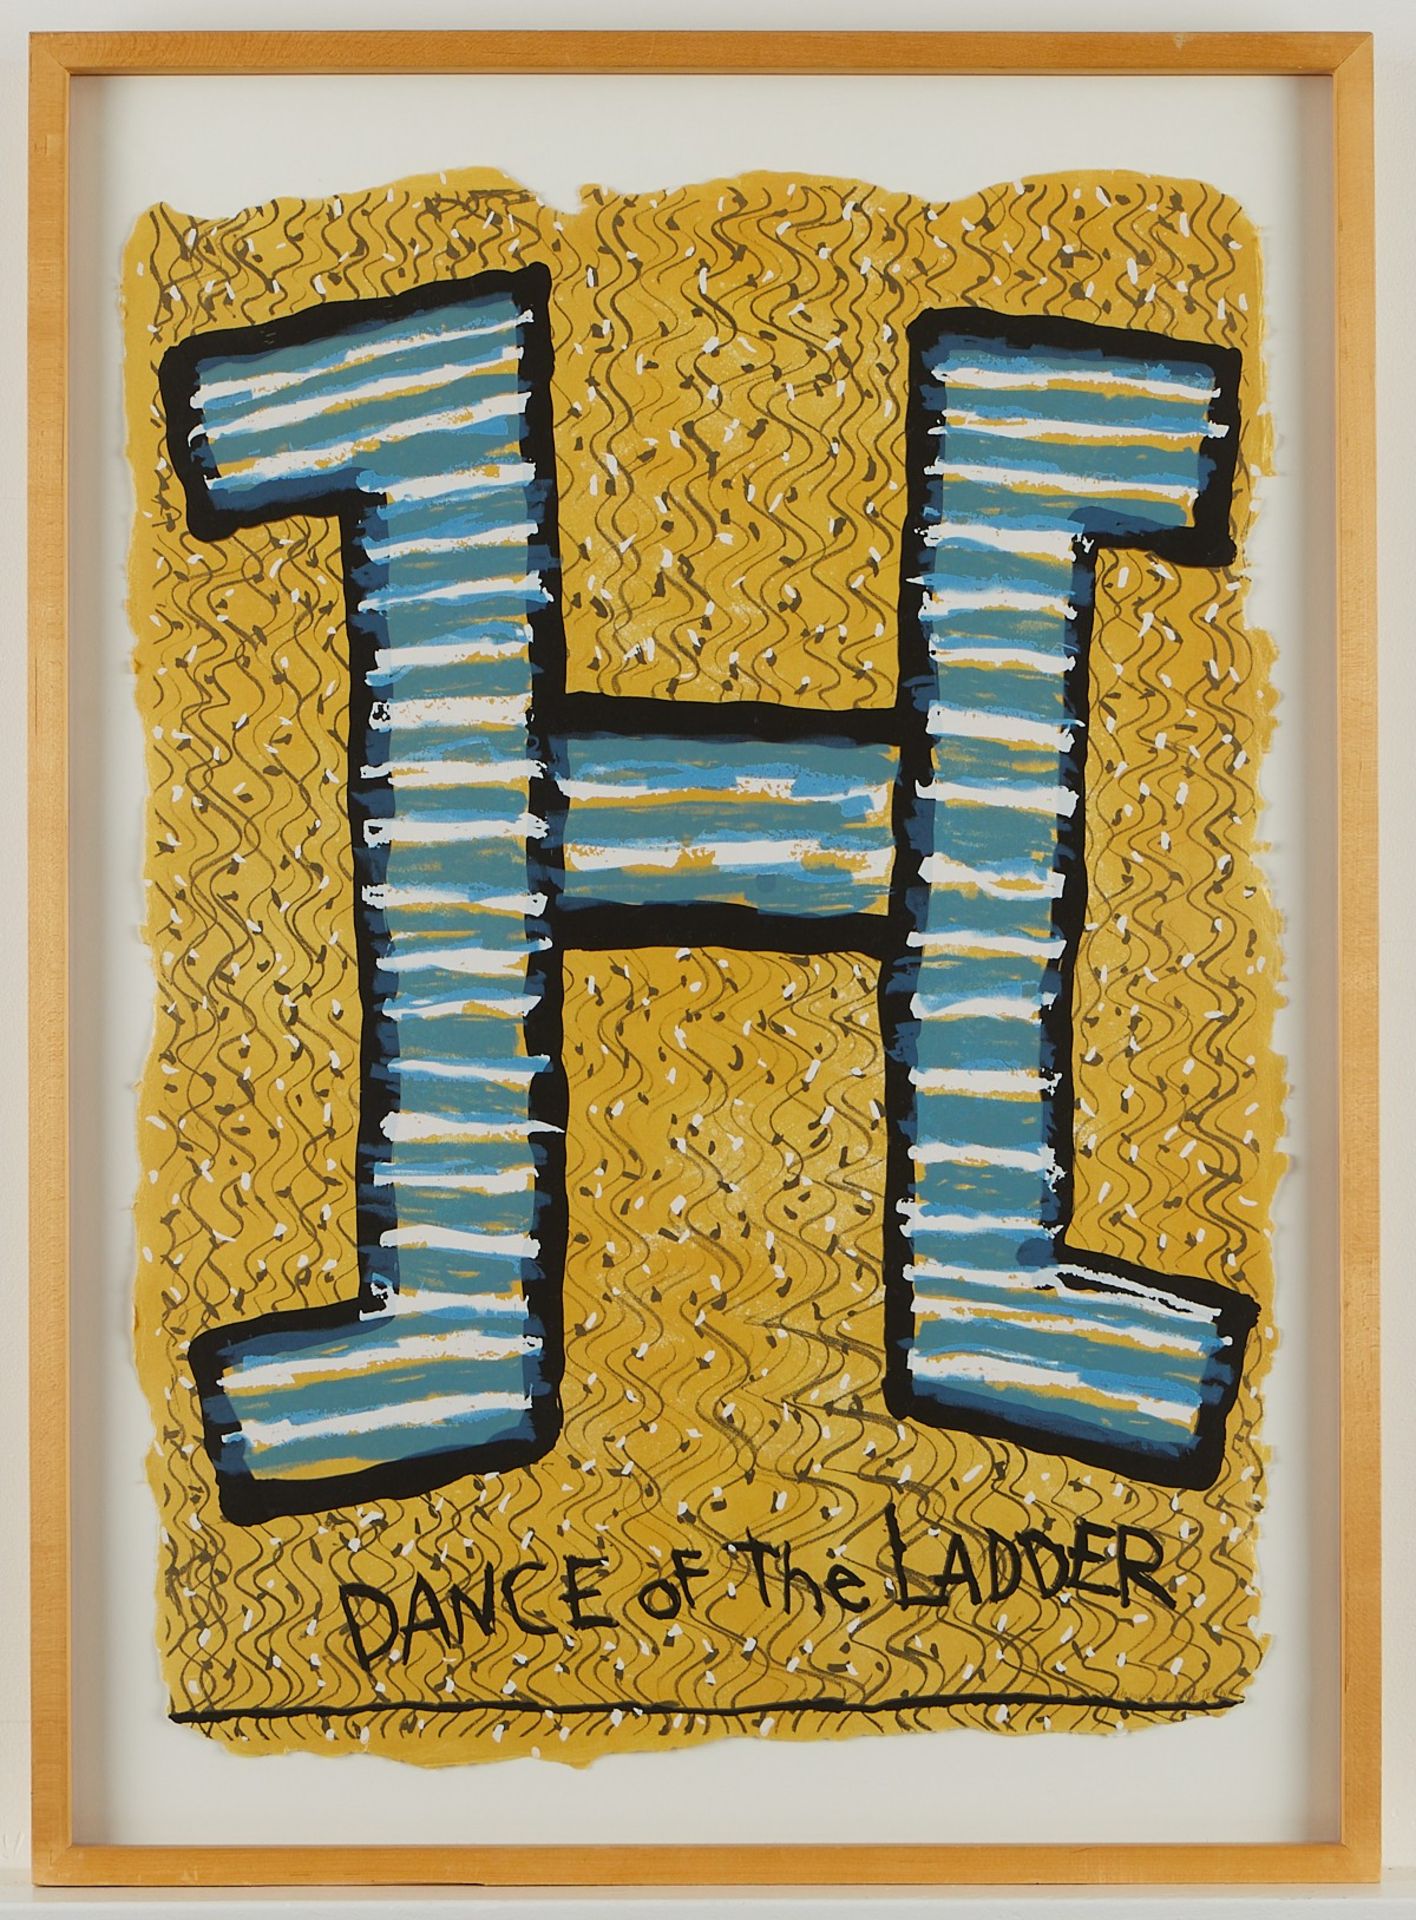 Suite 4 Harmony Hammond Dance of the Ladder Prints - Image 3 of 18